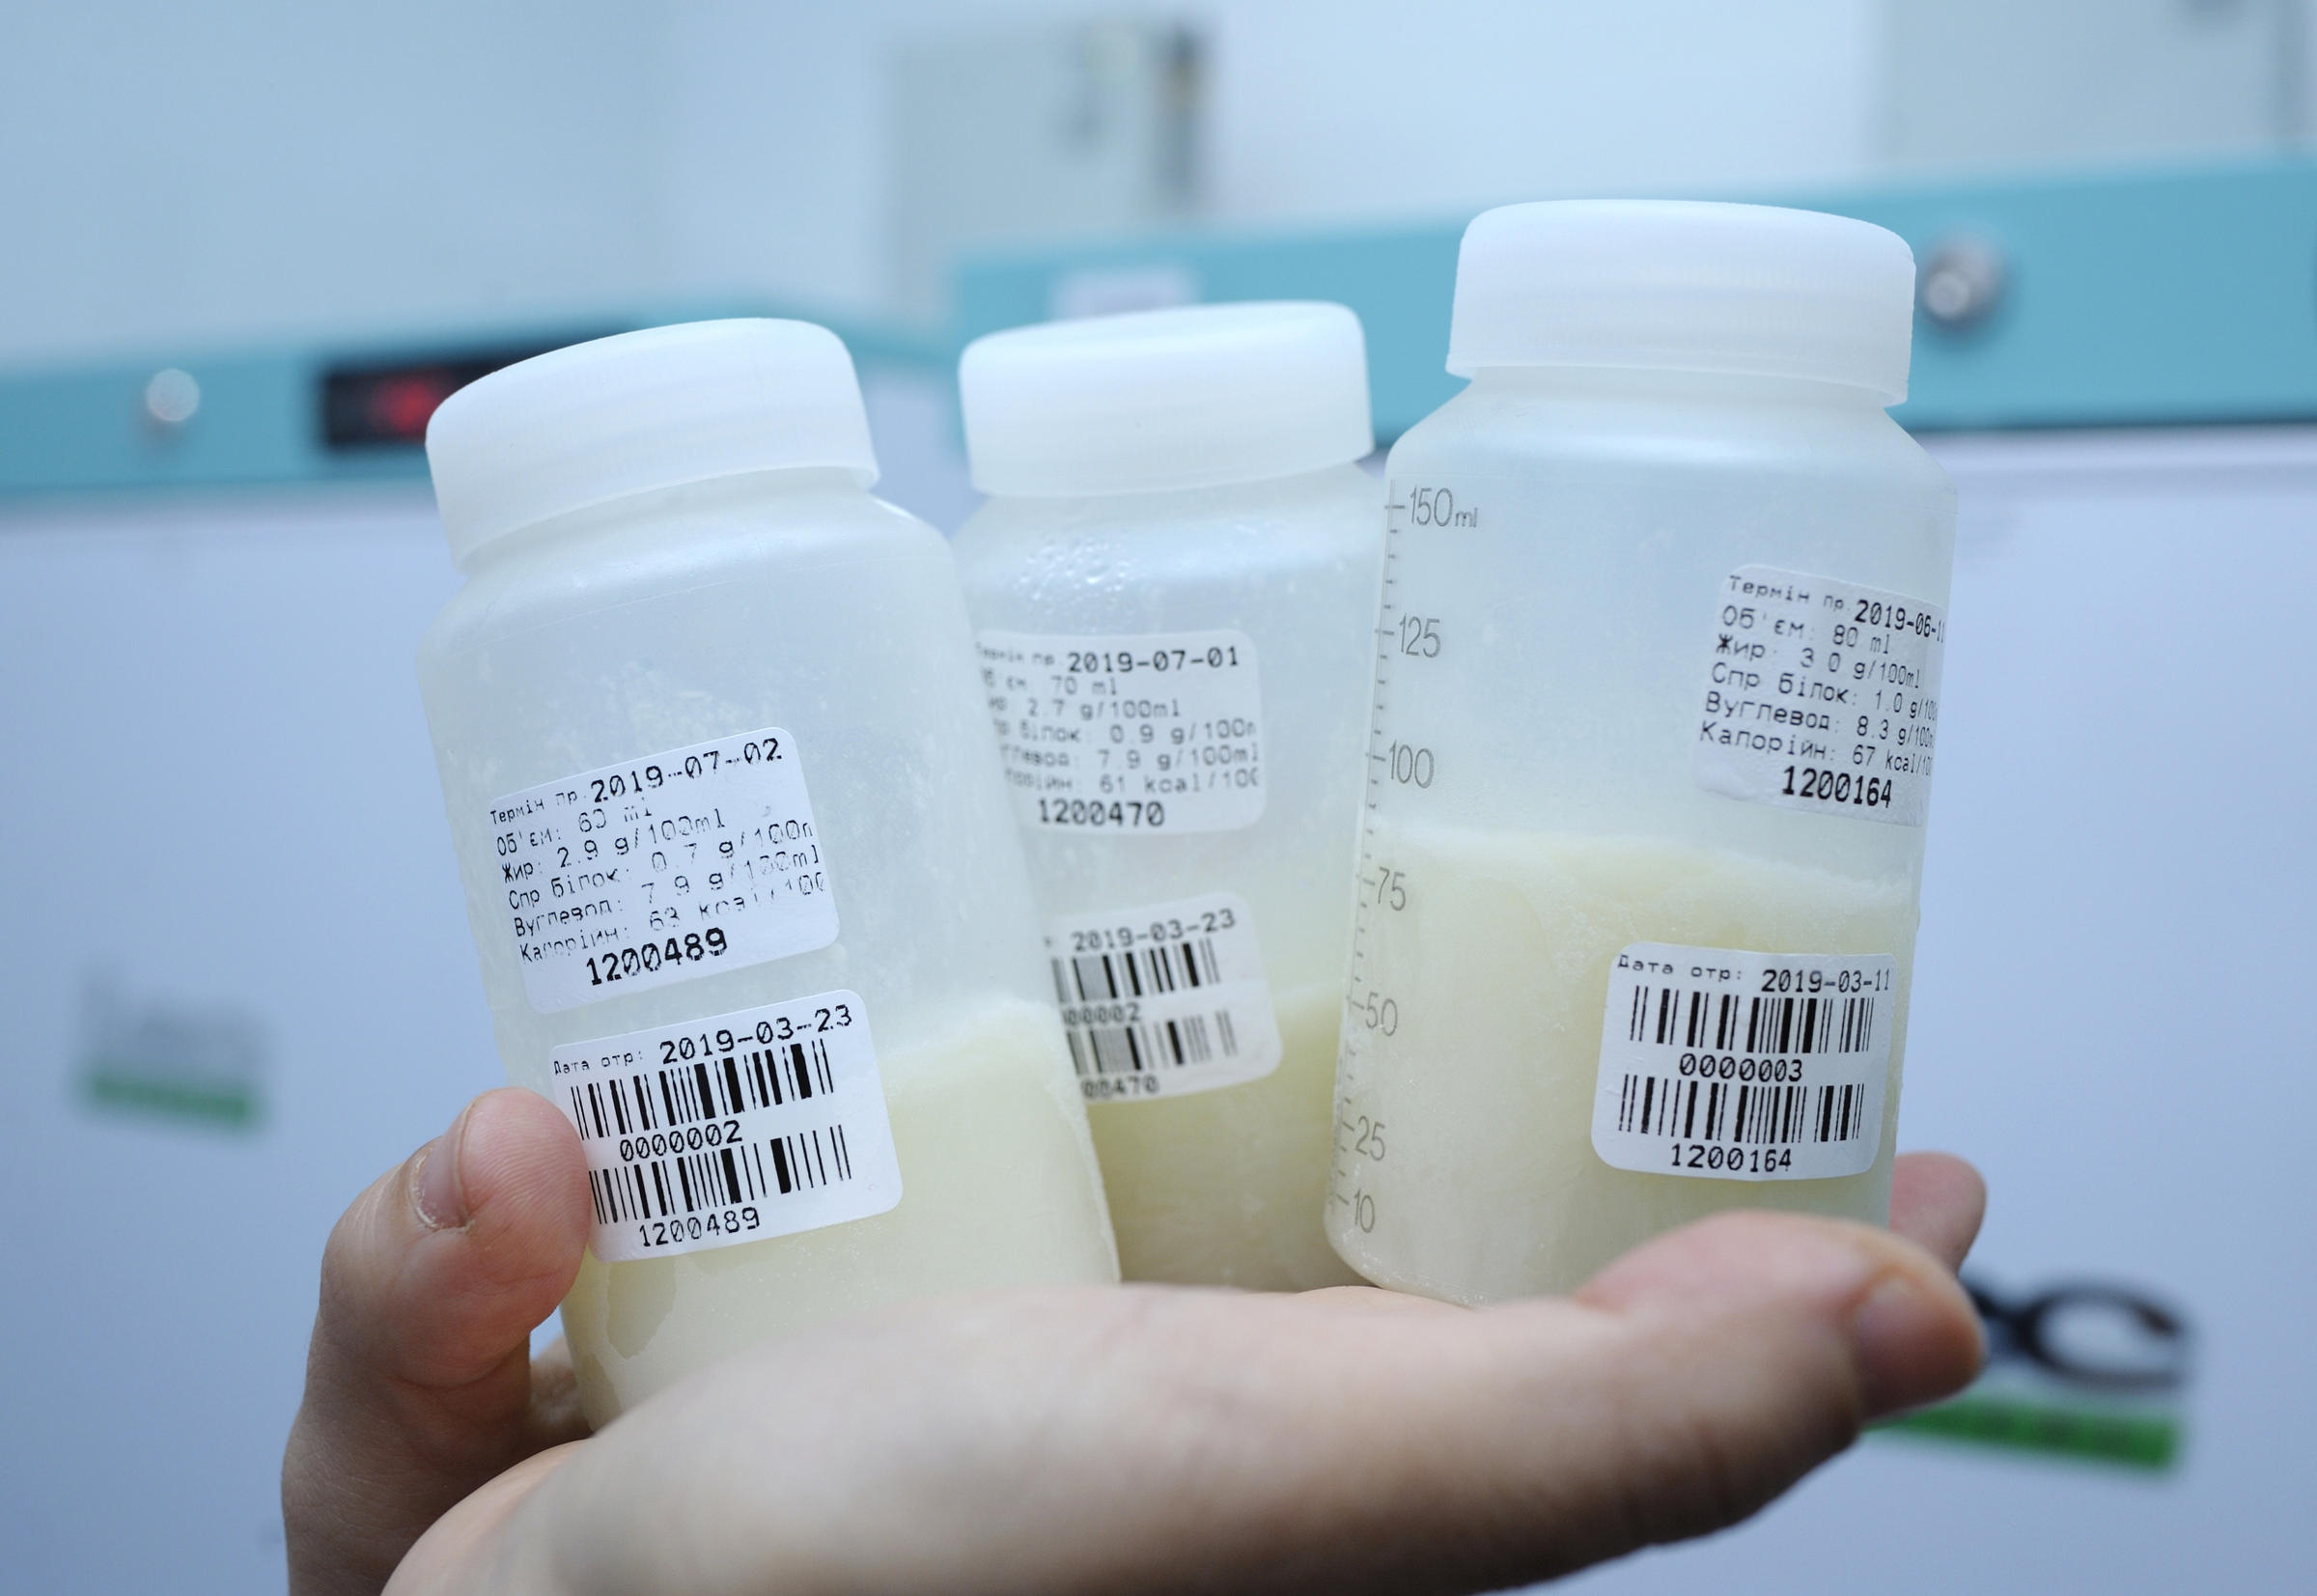 Breast Milk Donation Is Growing Across US But Its Not All Safe